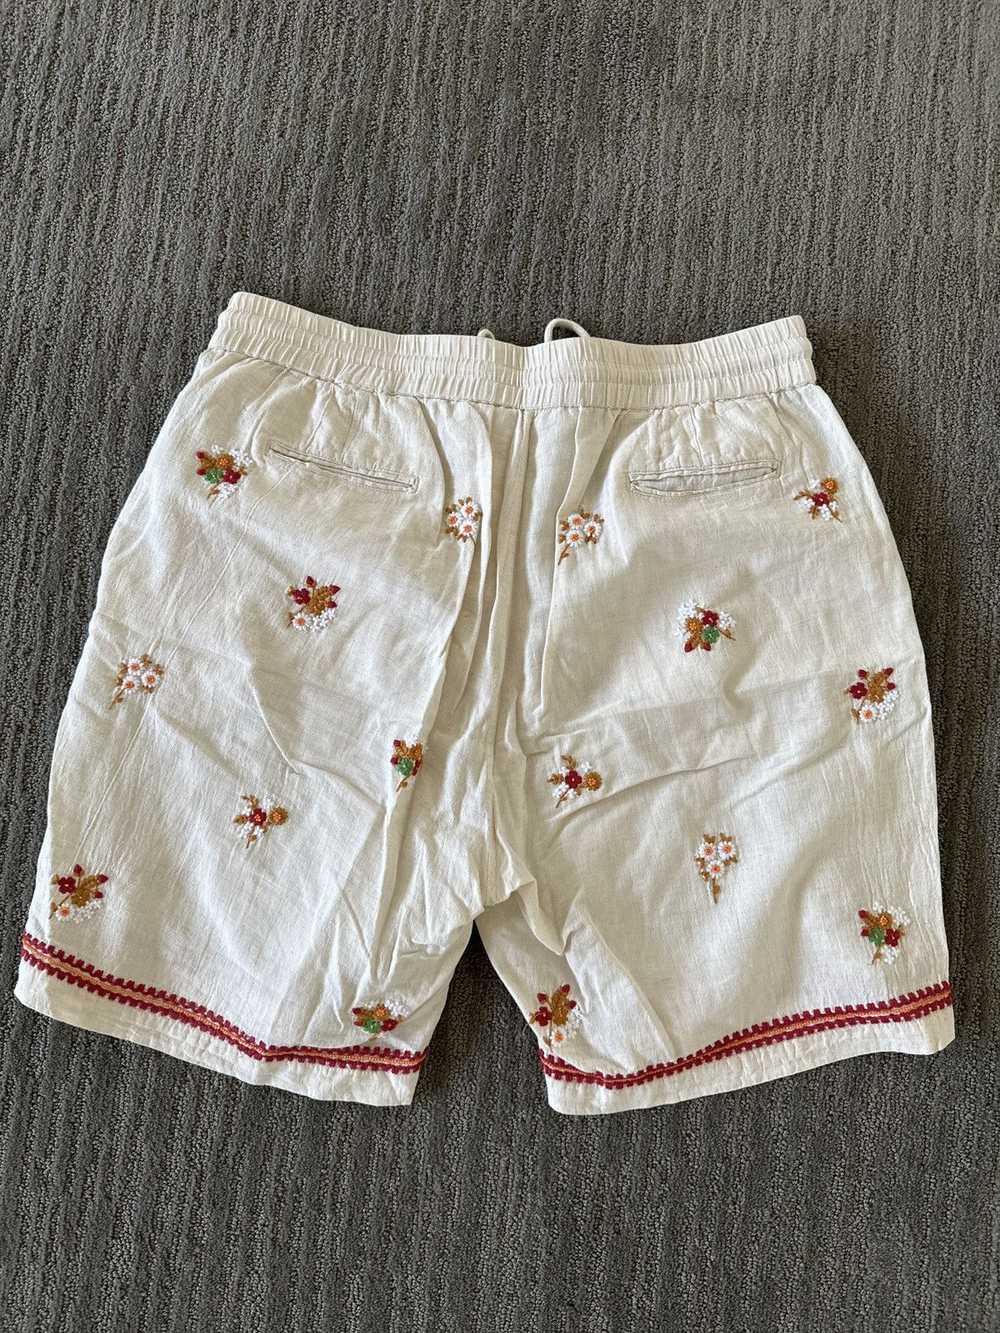 President's Off-White Embroidered Shorts - image 2